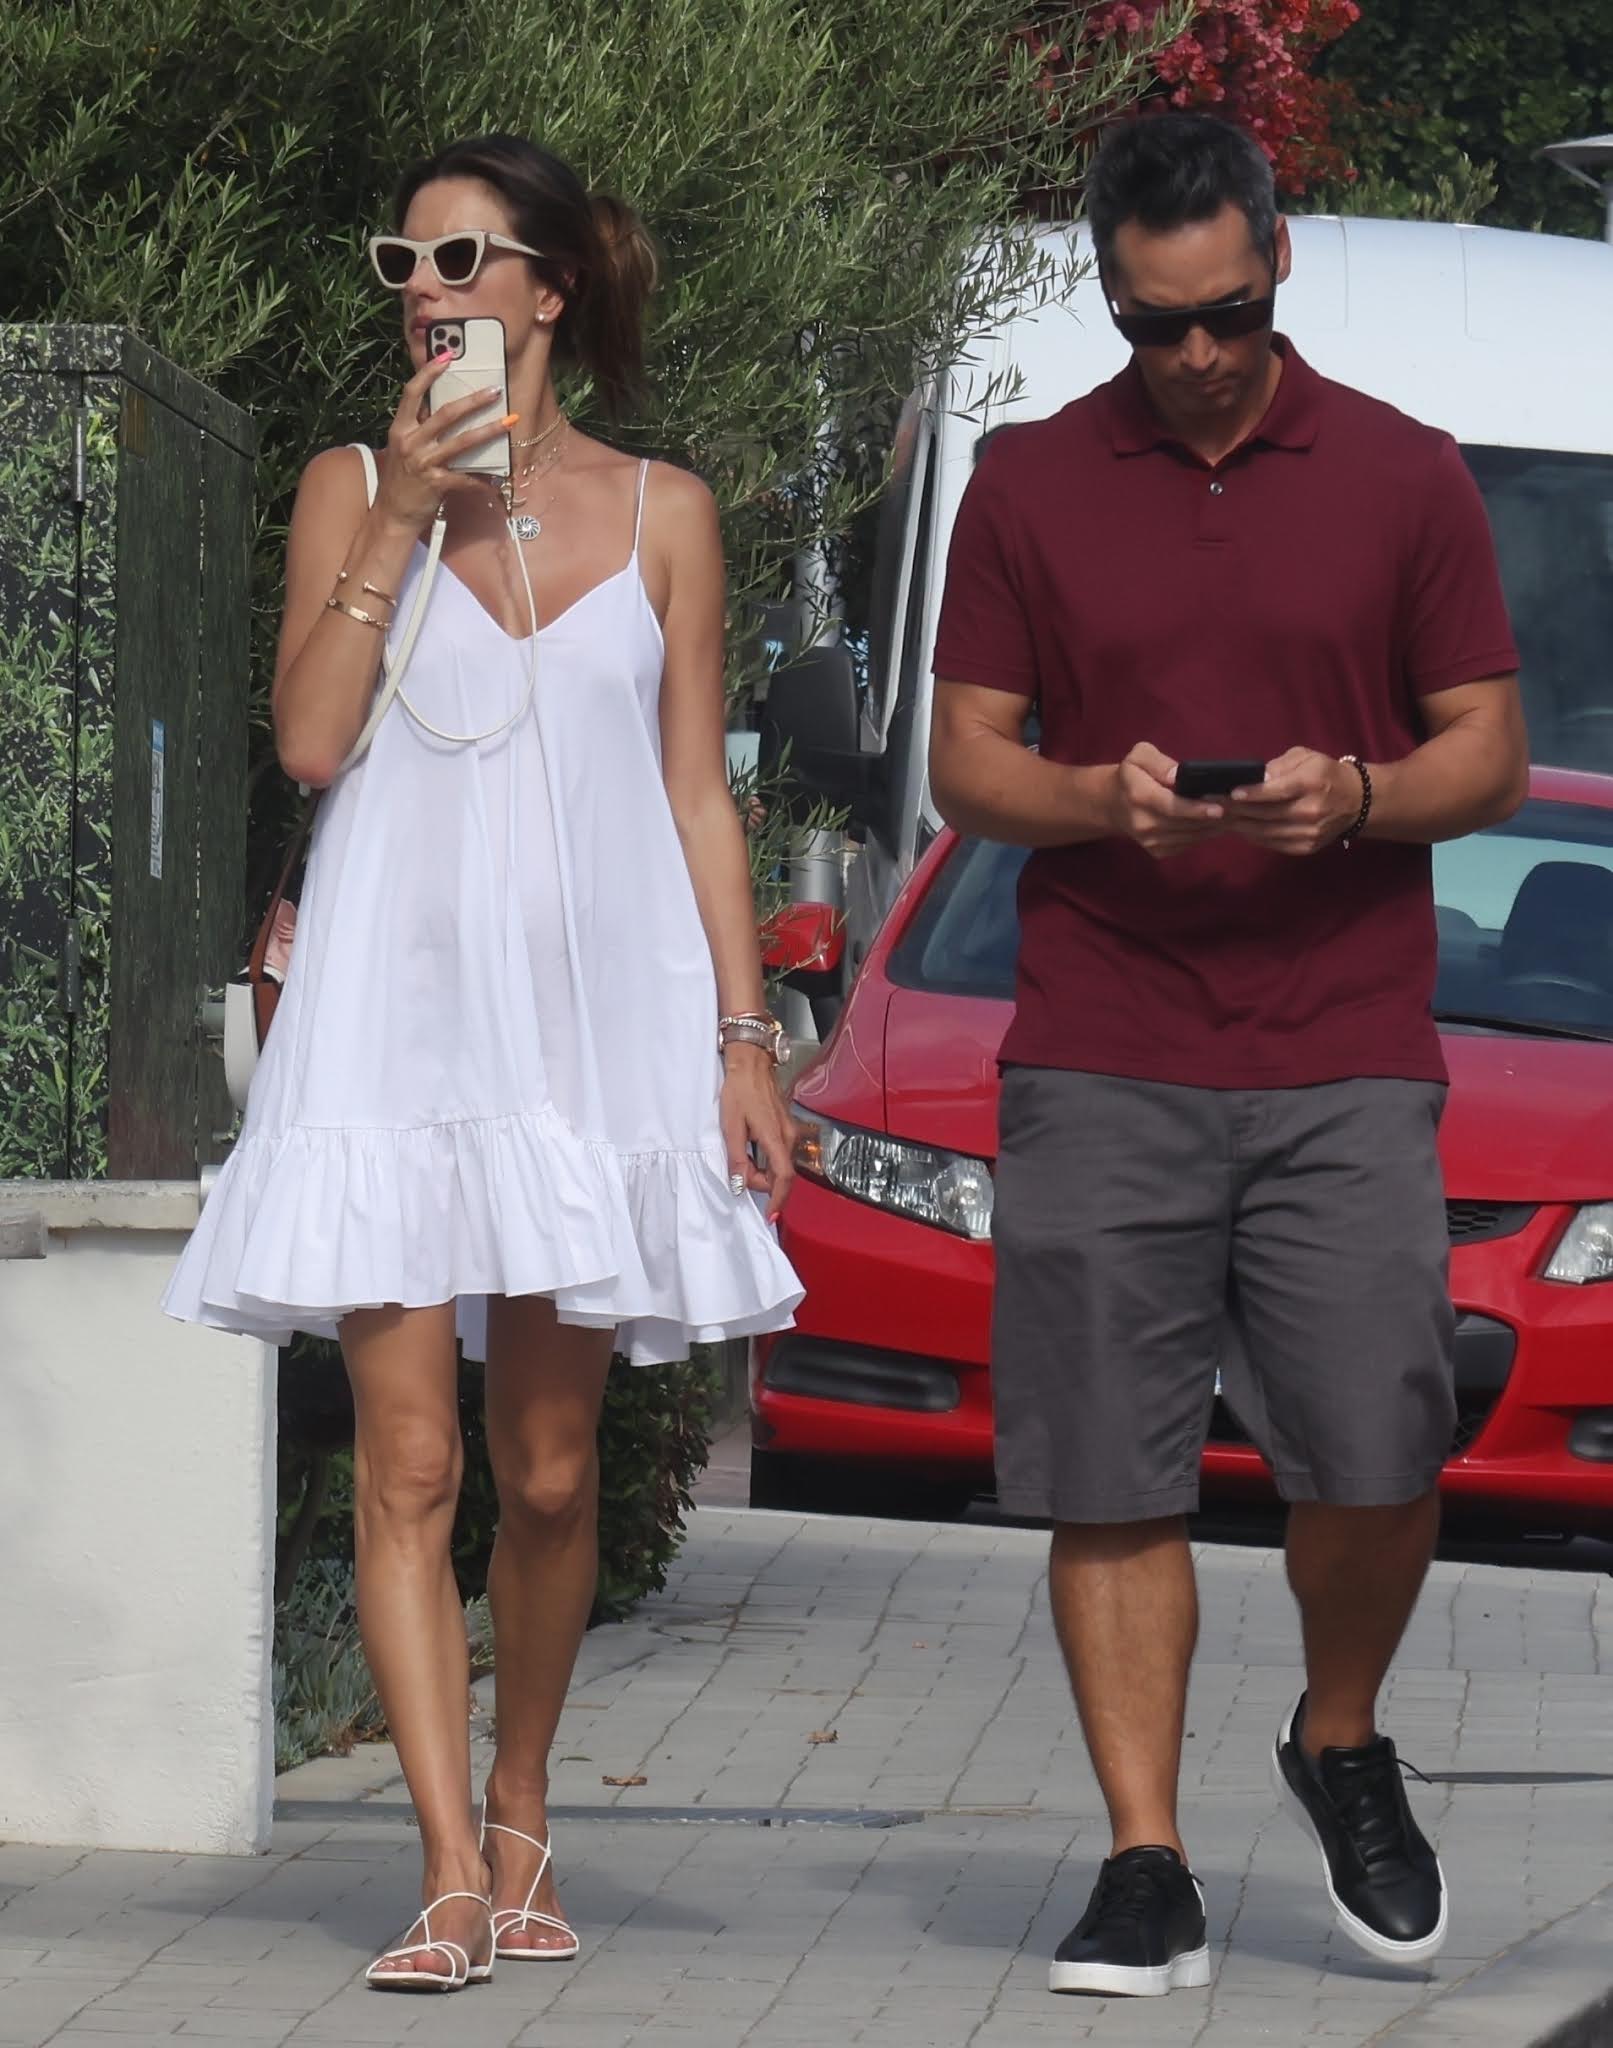 Alessandra Ambrosio in a white Summer dress while out with her boyfriend in Malibu